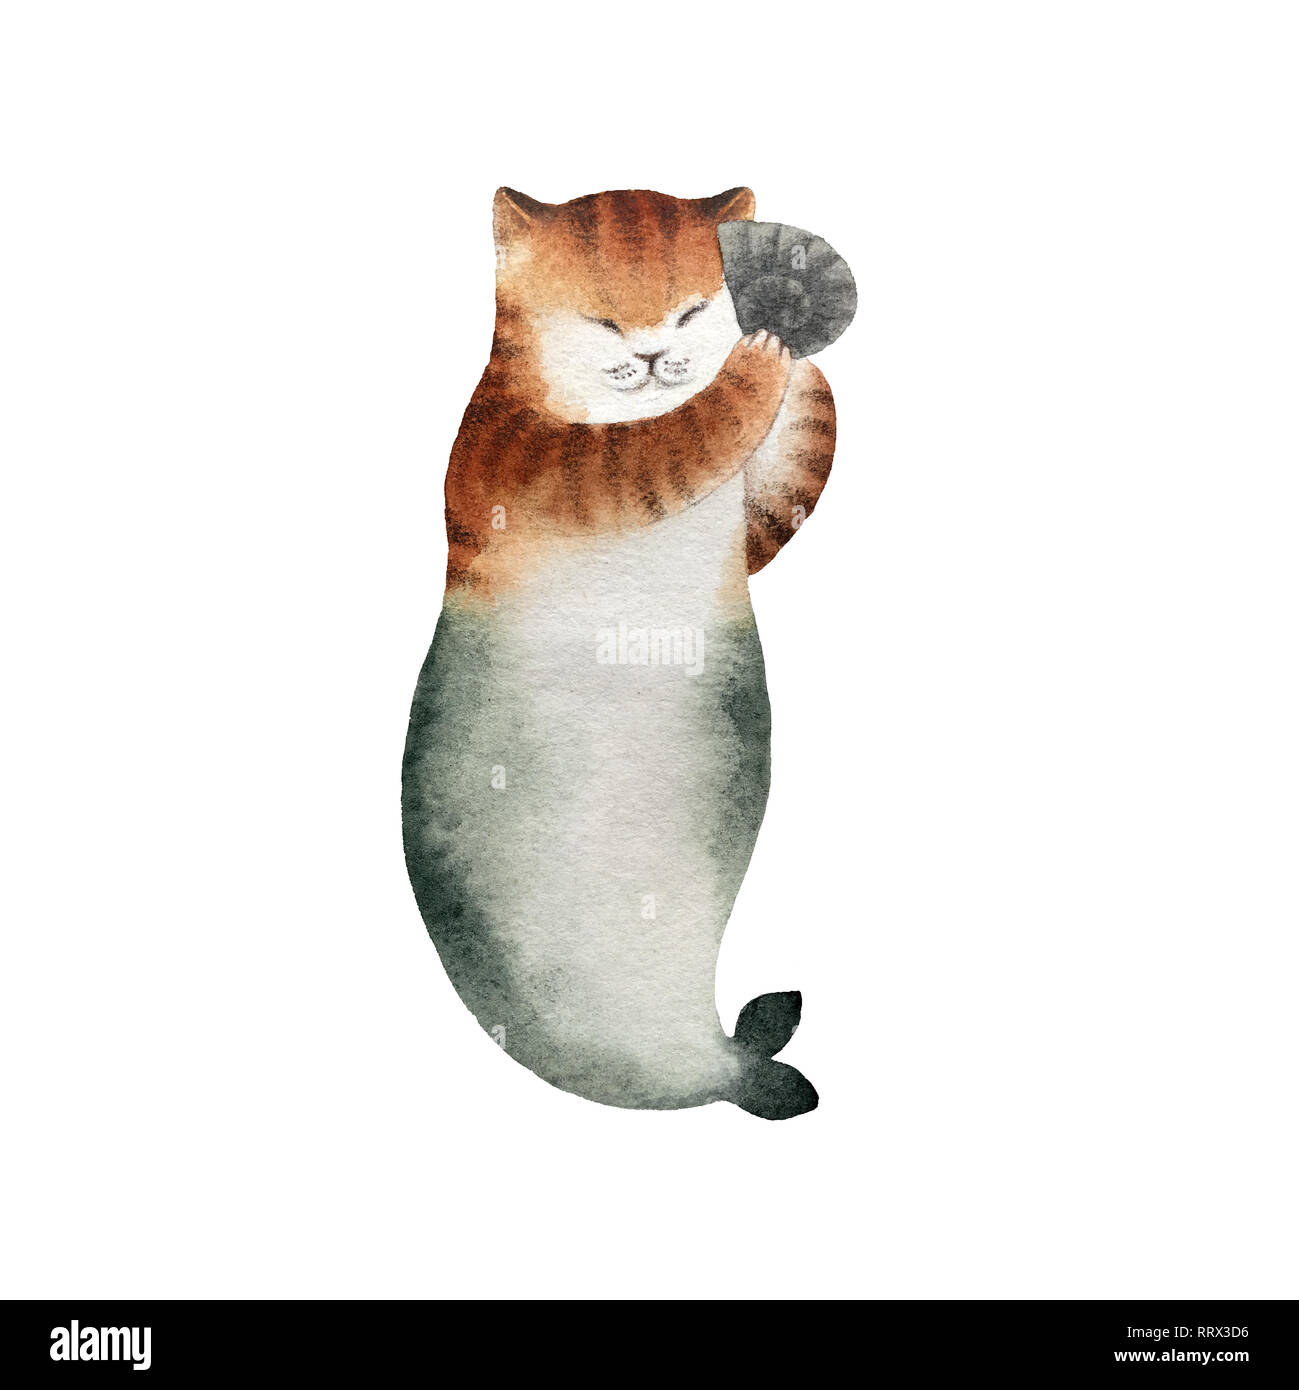 Cute watercolor cat mermaid character isolated on white background for design, postcards, banners. Stock Photo